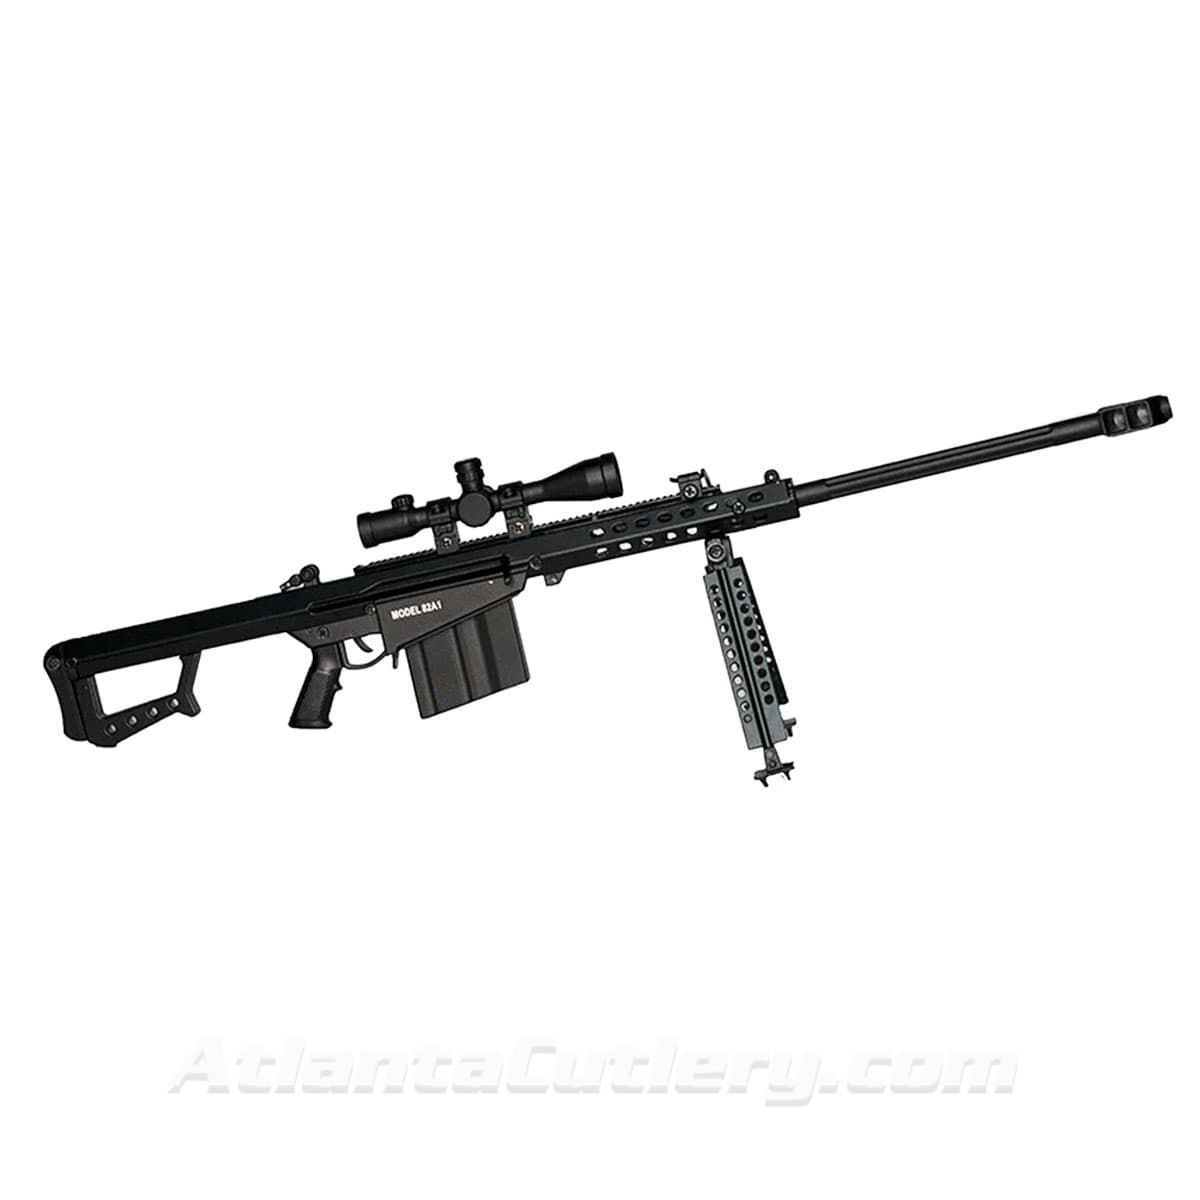 Goatgun black Barrett Model 82A1 .50 Cal is metal 1:3 scale die-cast model with sliding bolt carrier and trigger that squeezes